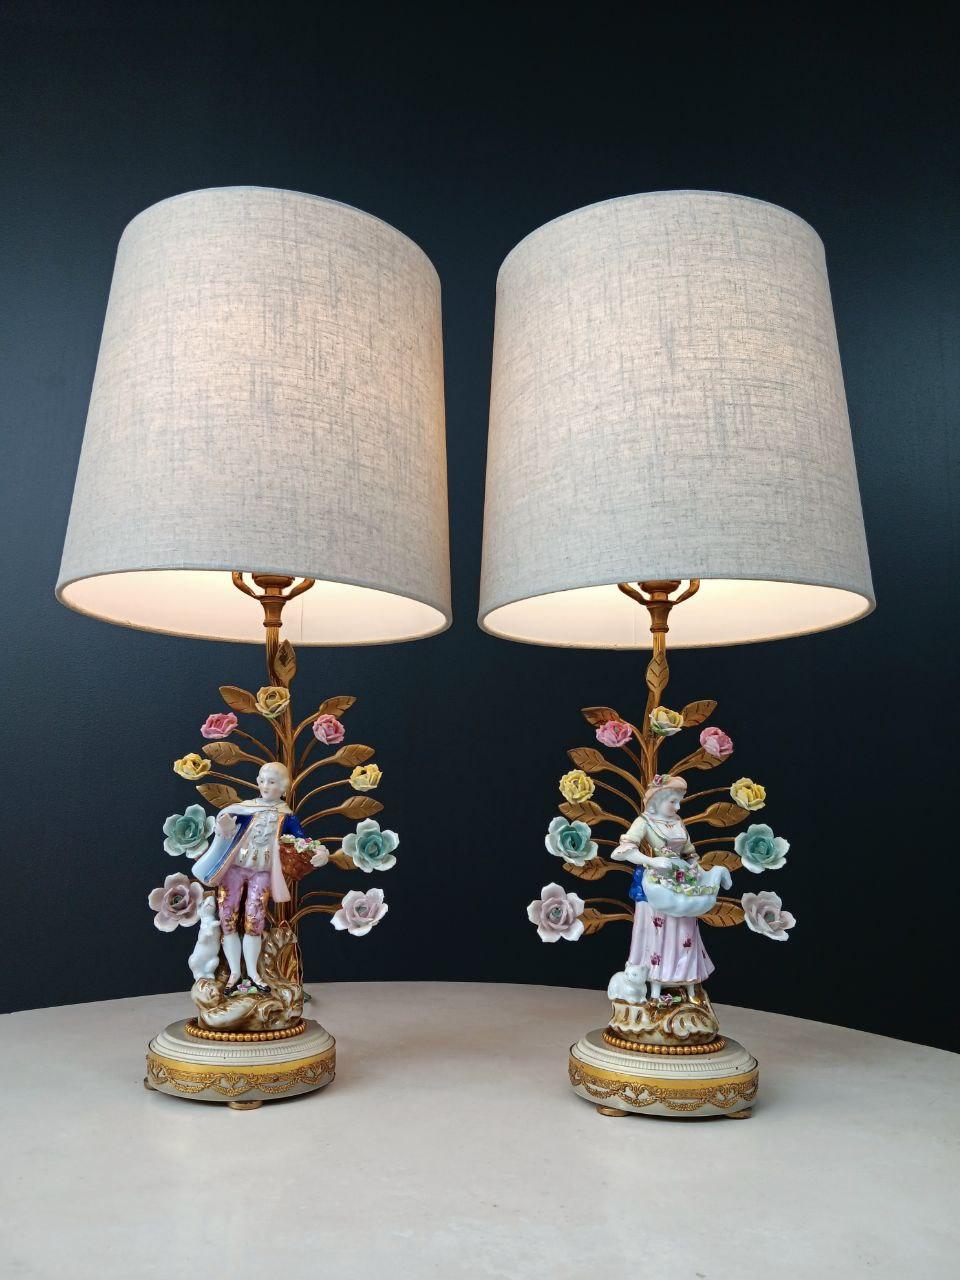 French Provincial Pair of French Louis XV-Style Porcelain Provincial Figural Lamps